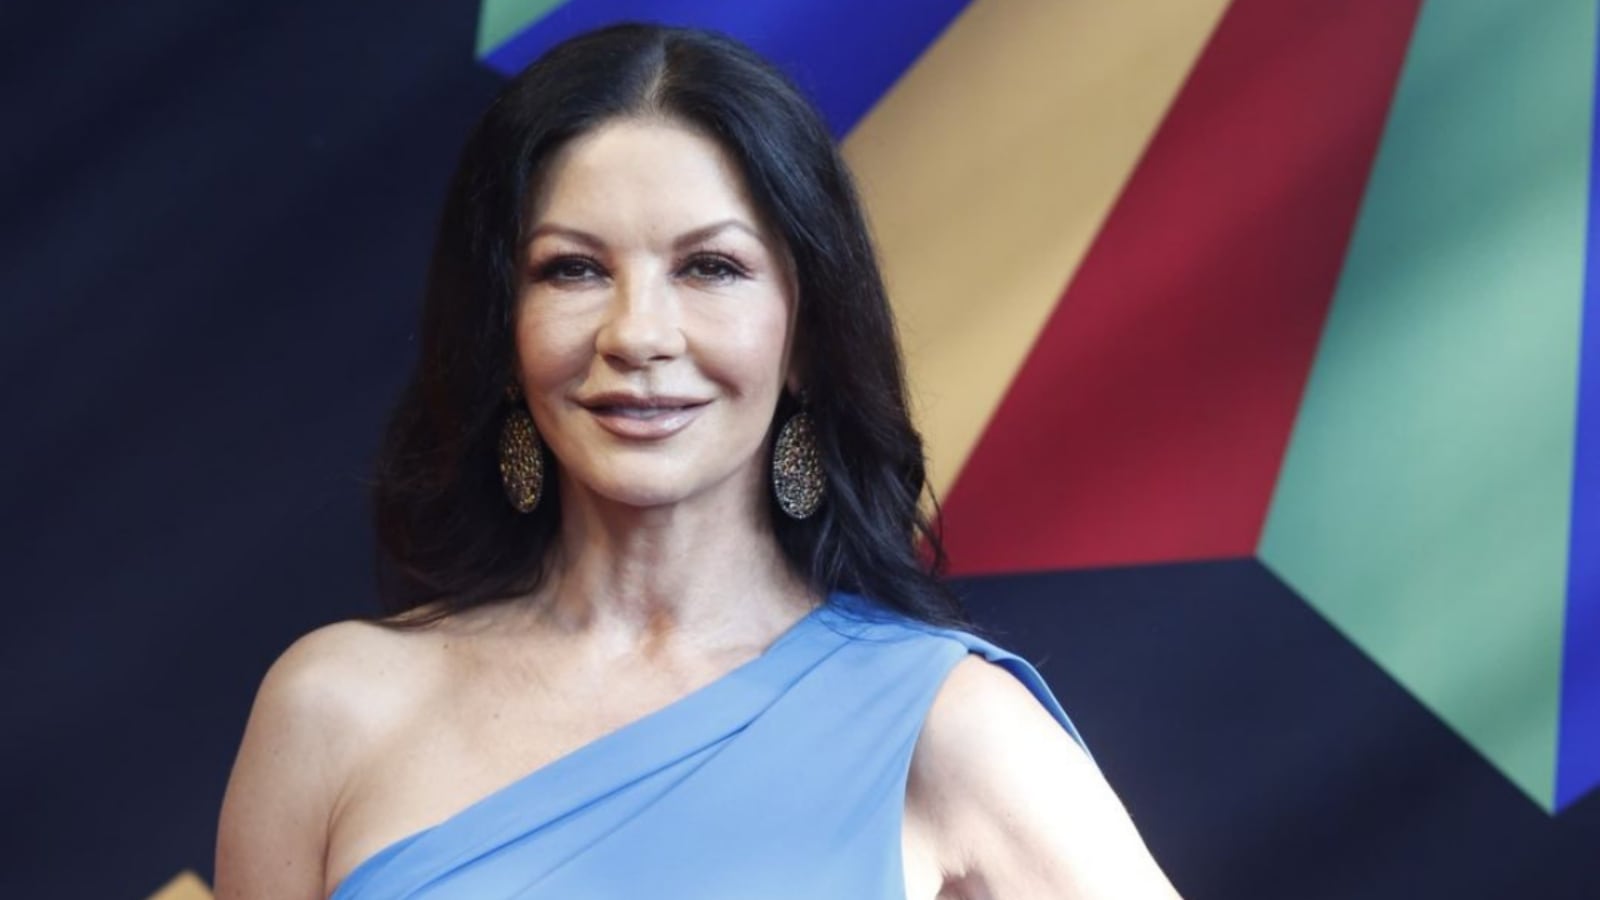 catherine zeta-jones says an indian doctor saved her life: ‘i’m here because of the brilliance of an indian doctor’